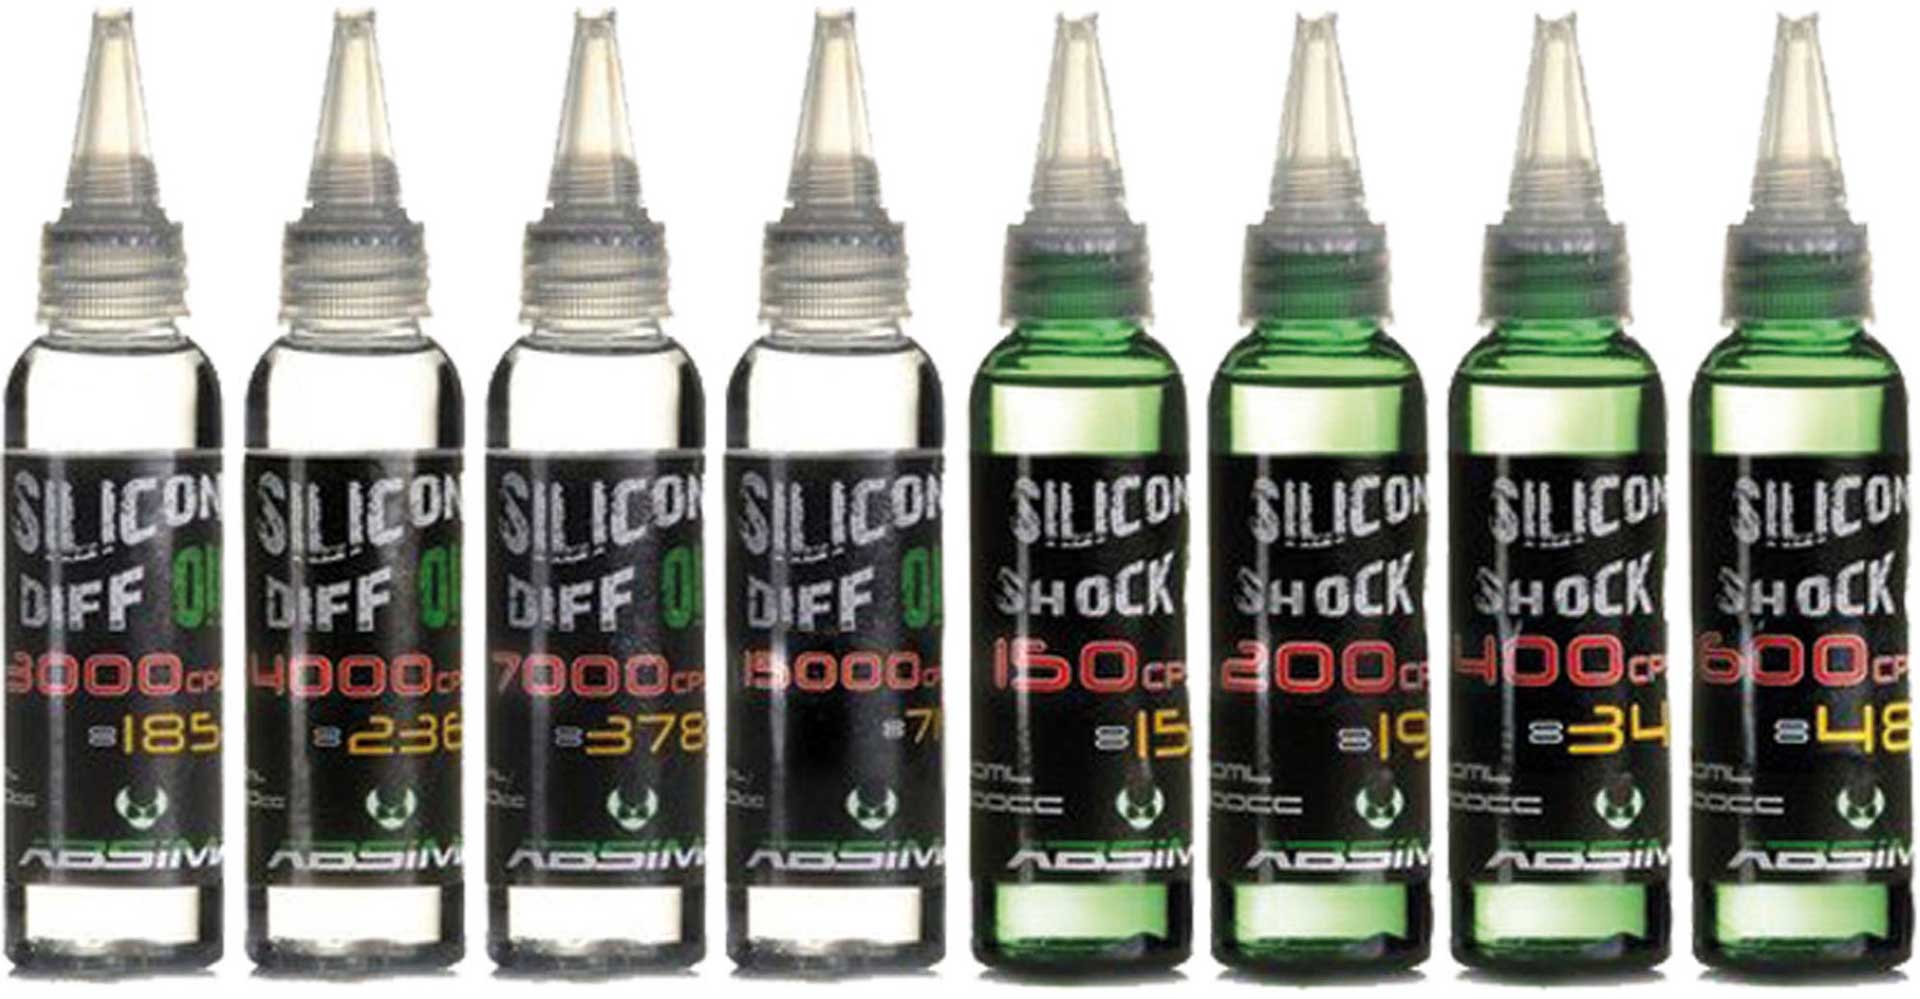 ABSIMA SILICONE DIFFERENTIAL OIL 200000CPS 60ML